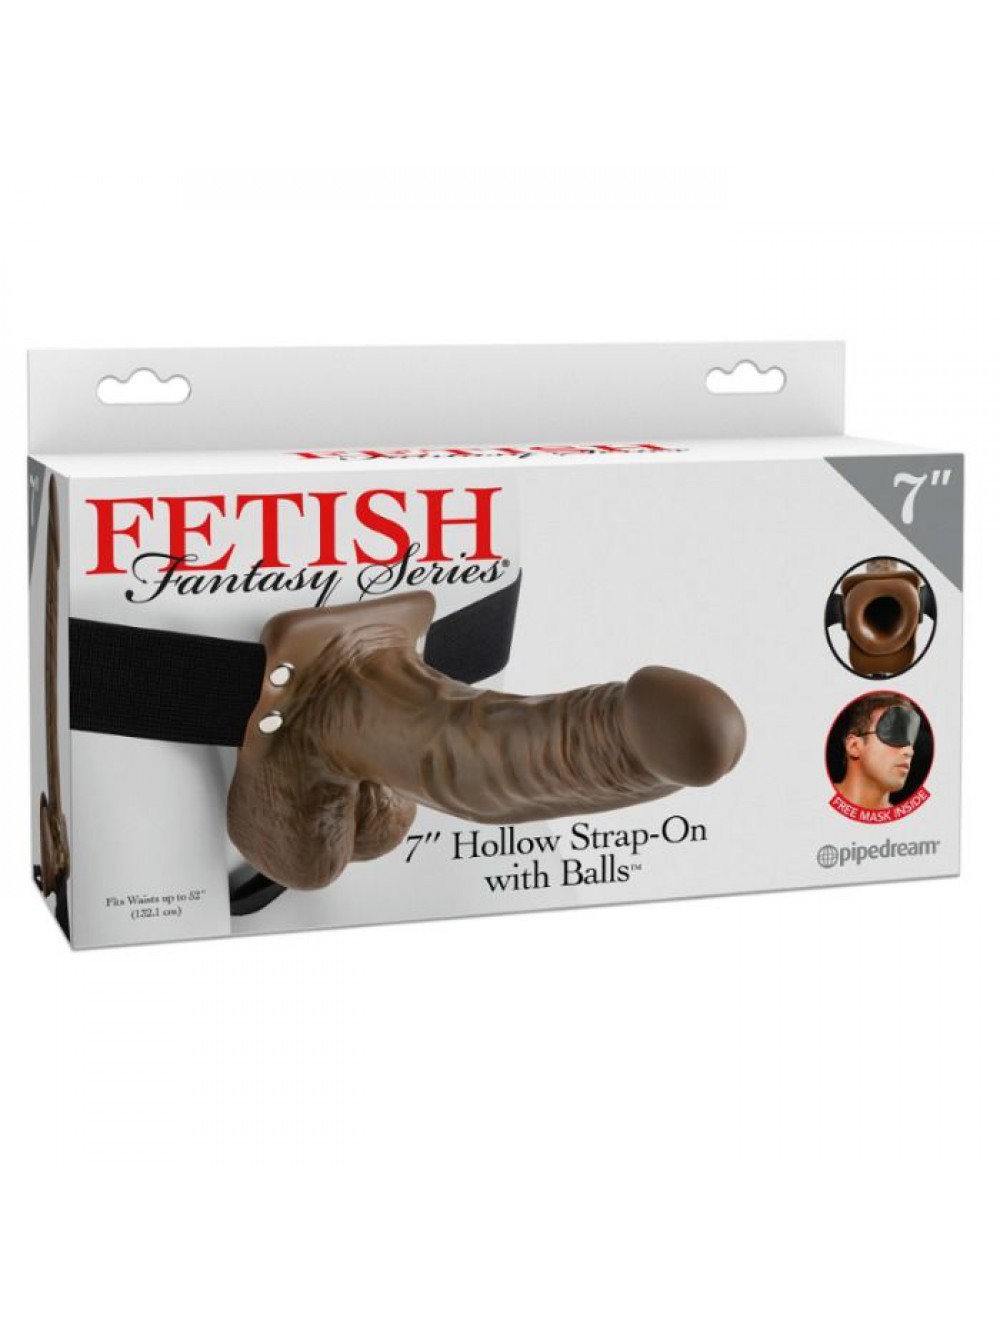 FETISH FANTASY SERIES 7" HOLLOW STRAP-ON WITH BALLS 603912741544